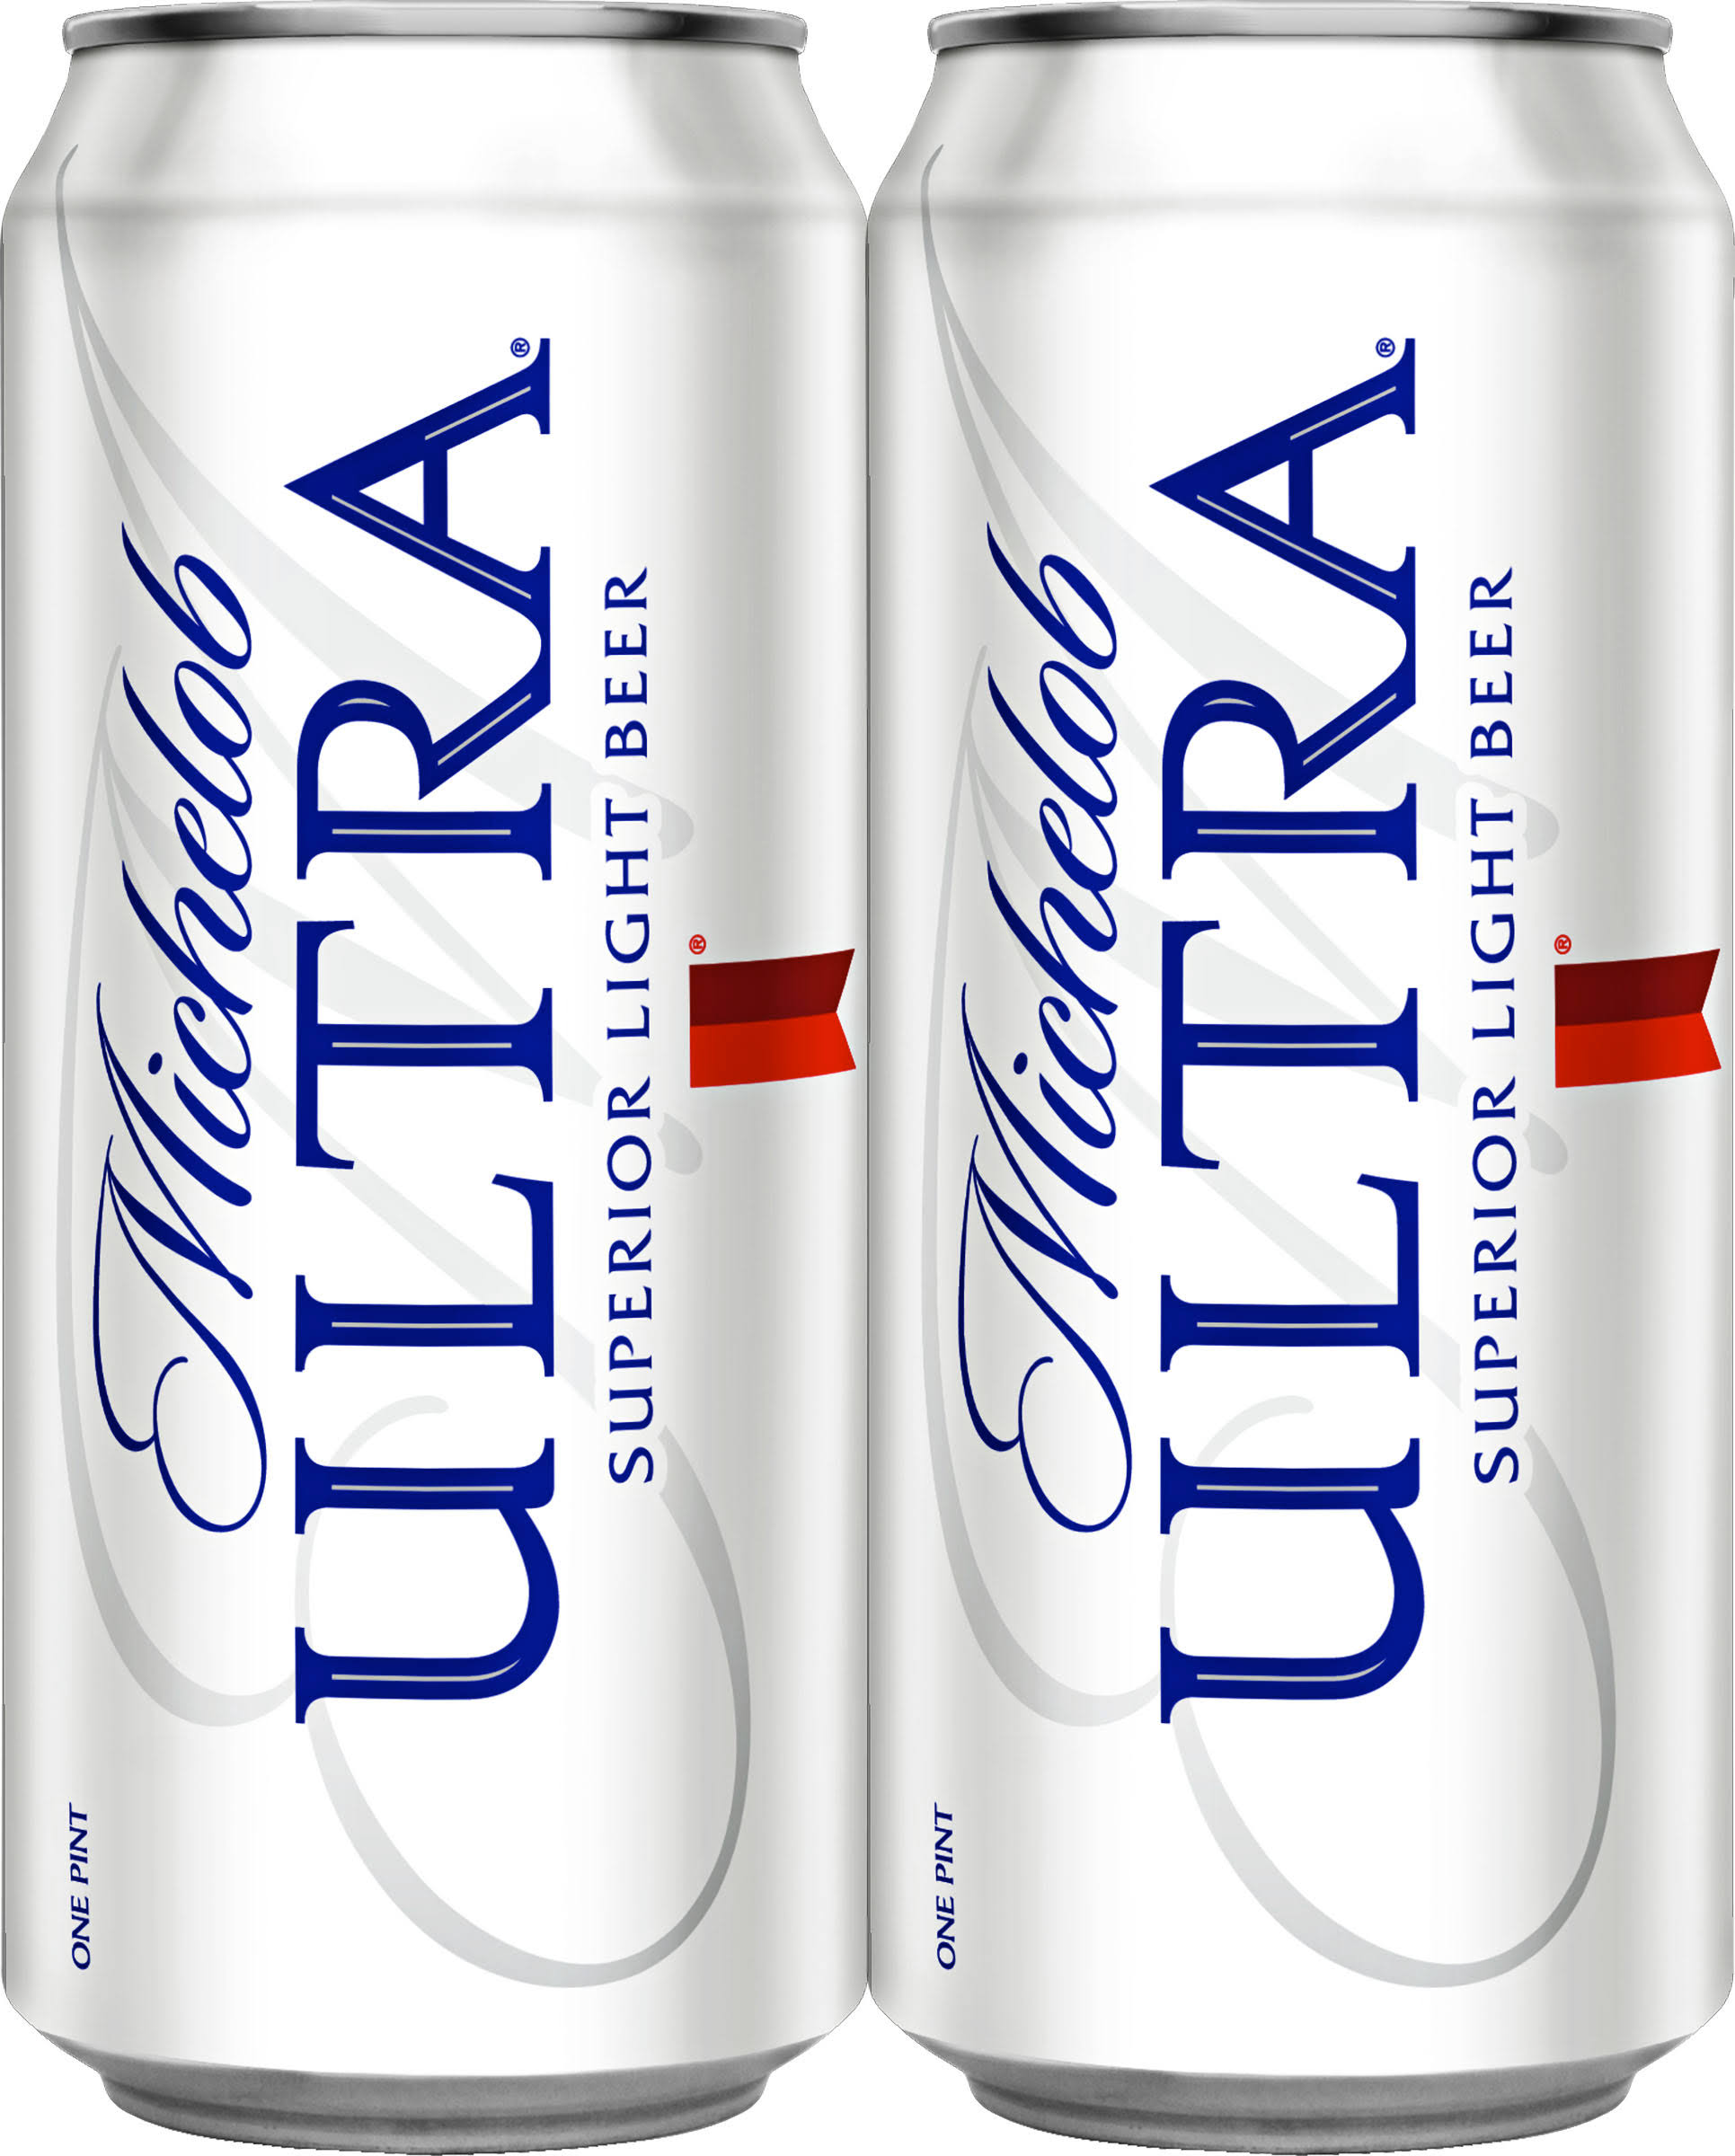 Michelob Ultra Beer - 16 oz